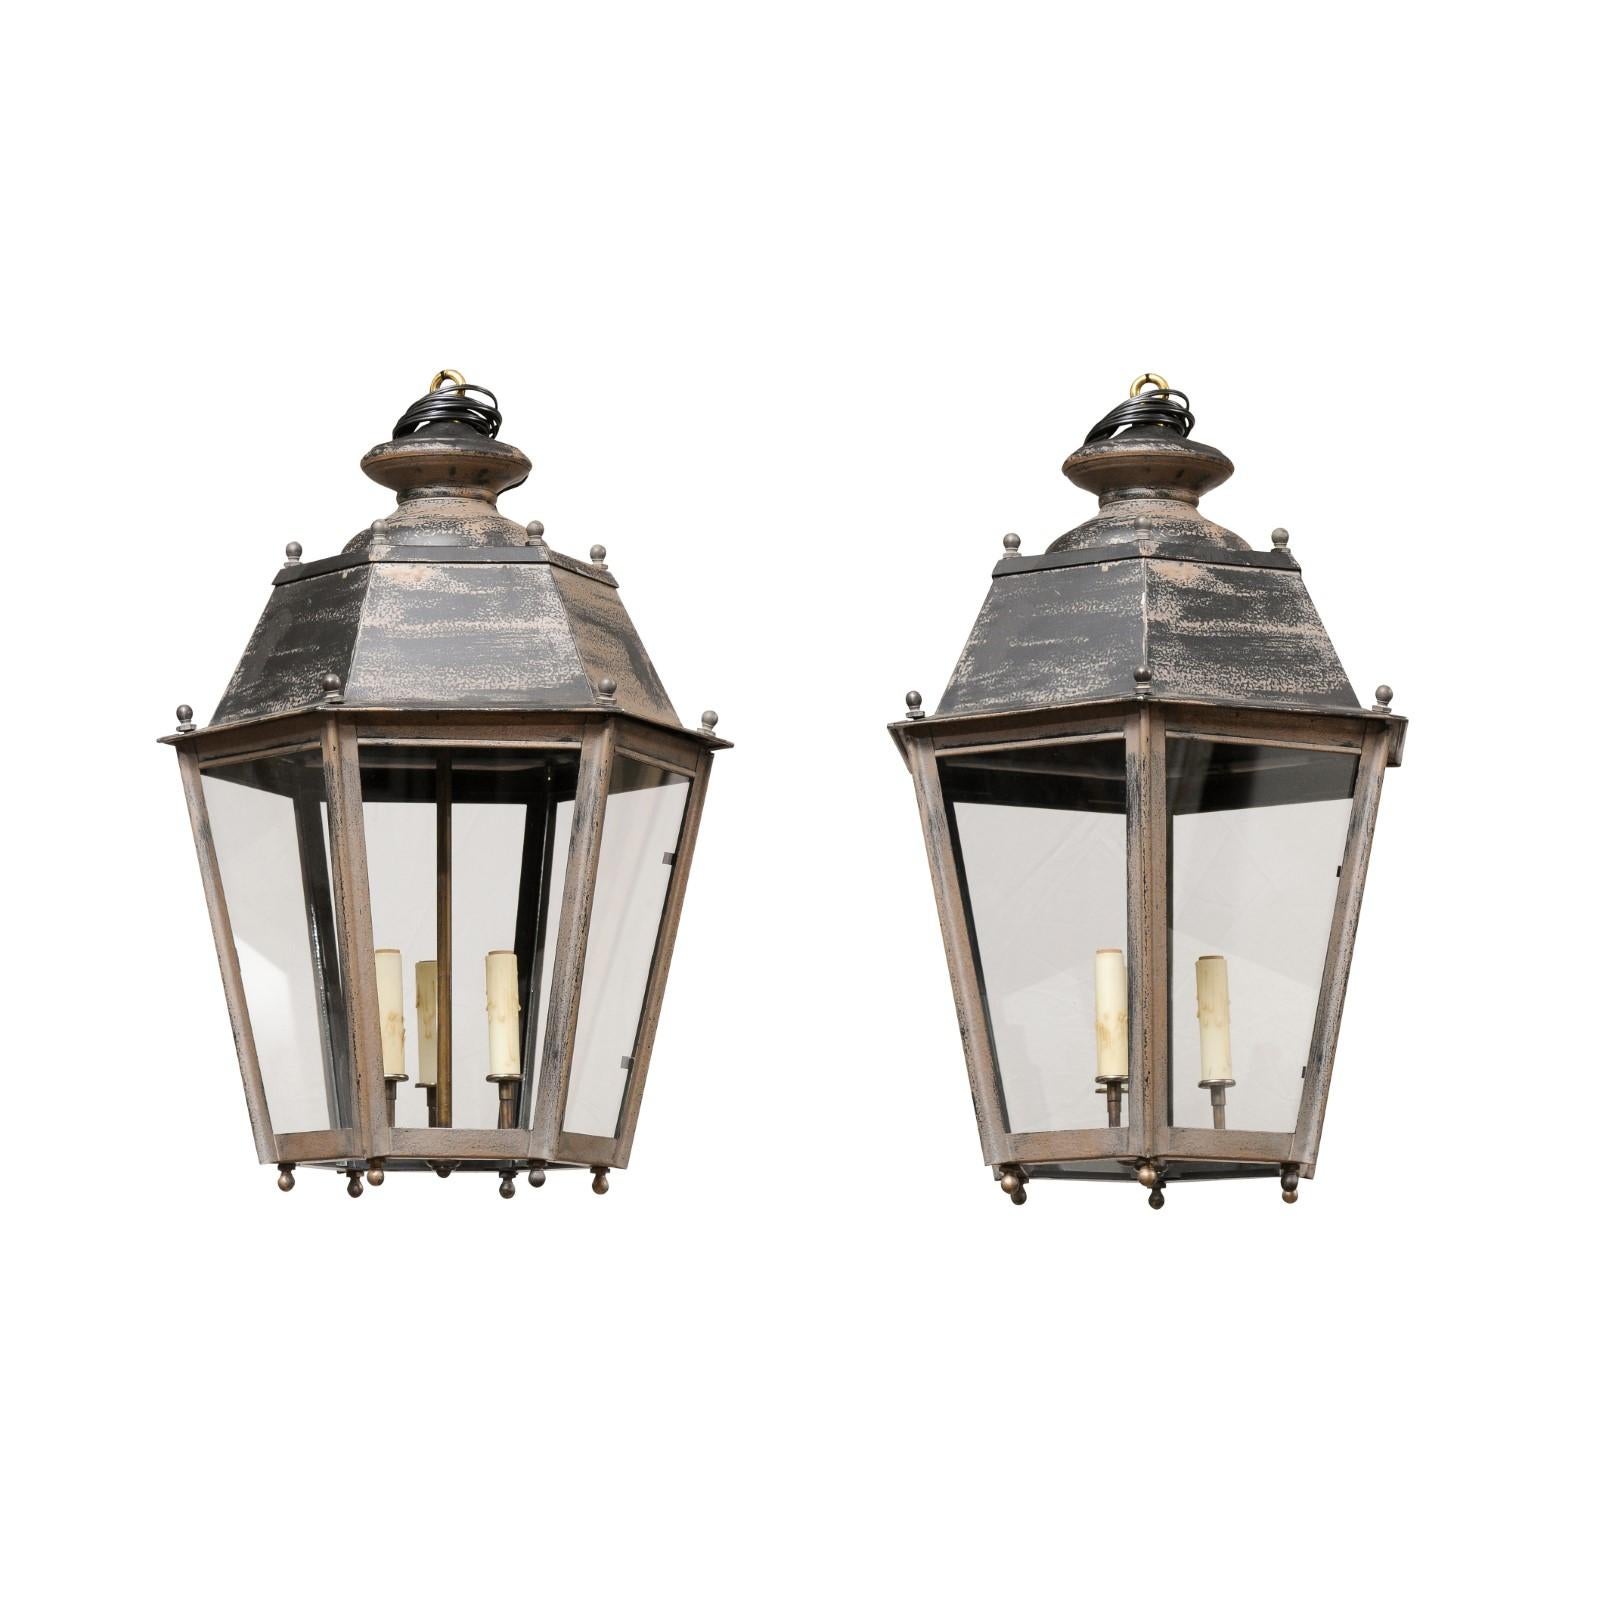 A pair of French patinated metal hexagonal lanterns from the 20th century, with three lights, petite spheres, glass panels and nicely weathered patina. Created in France during the 20th century, each of this pair of patinated metal lanterns features